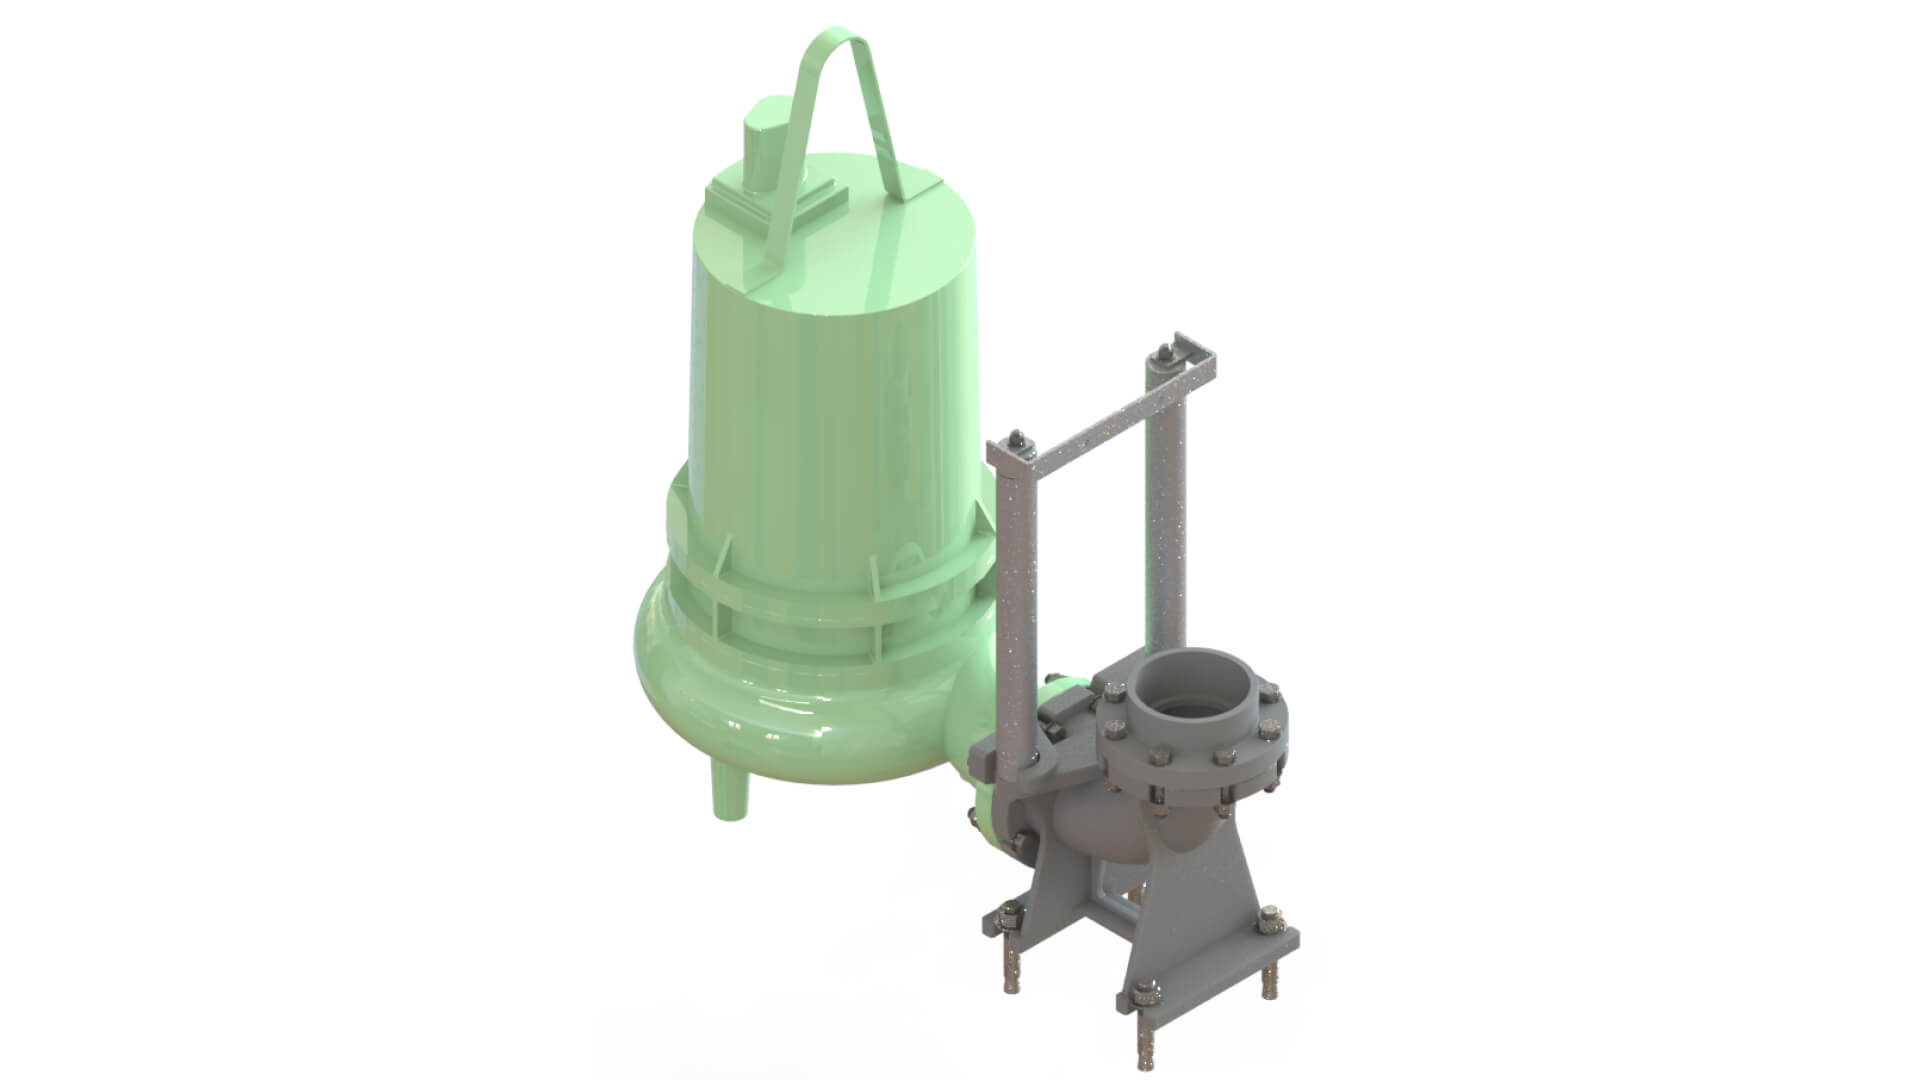 A 3D CAD drawing of the interior of a submersible pump.